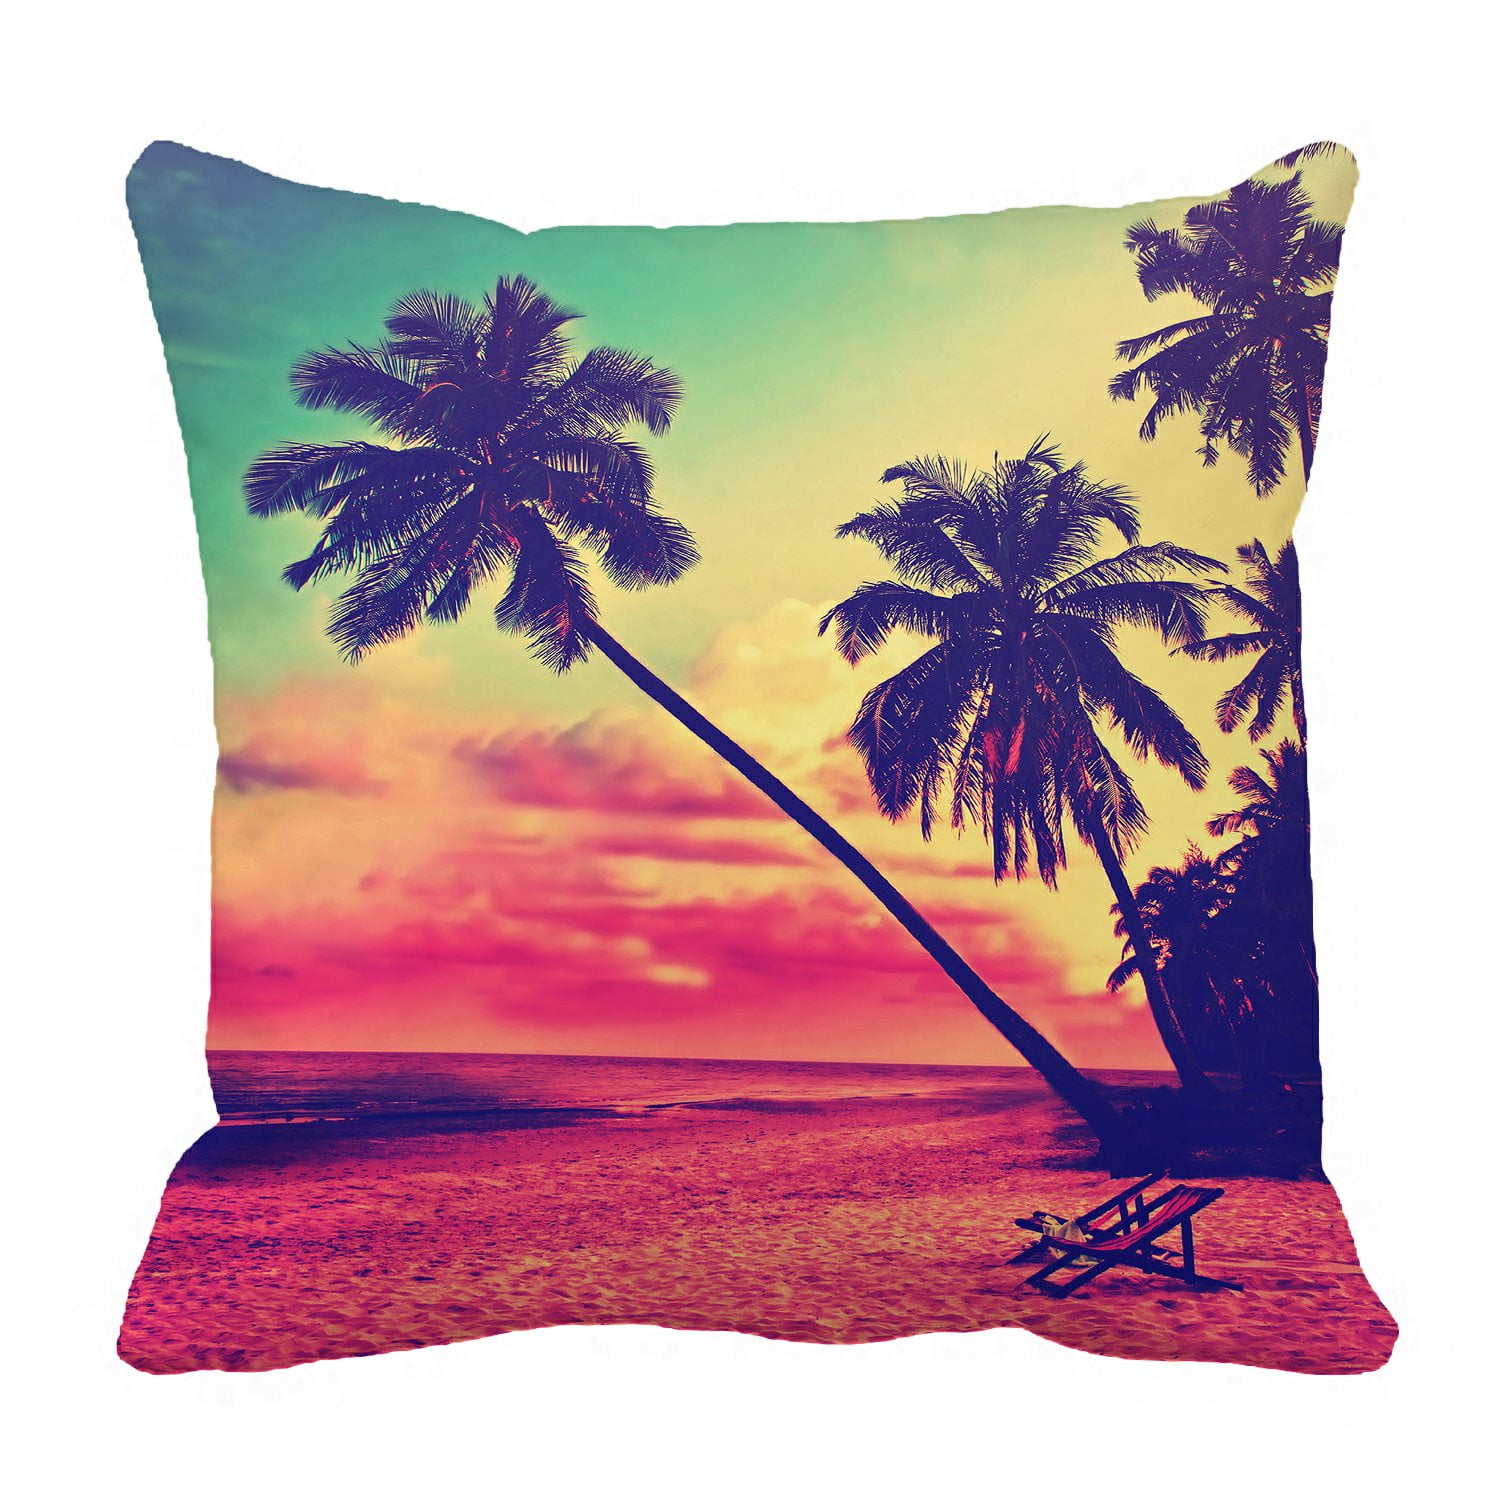 Details about   Beach Pillow Old Waggoner Palm Tree Ocean Beach Tropical Tiki 13" x 13" 